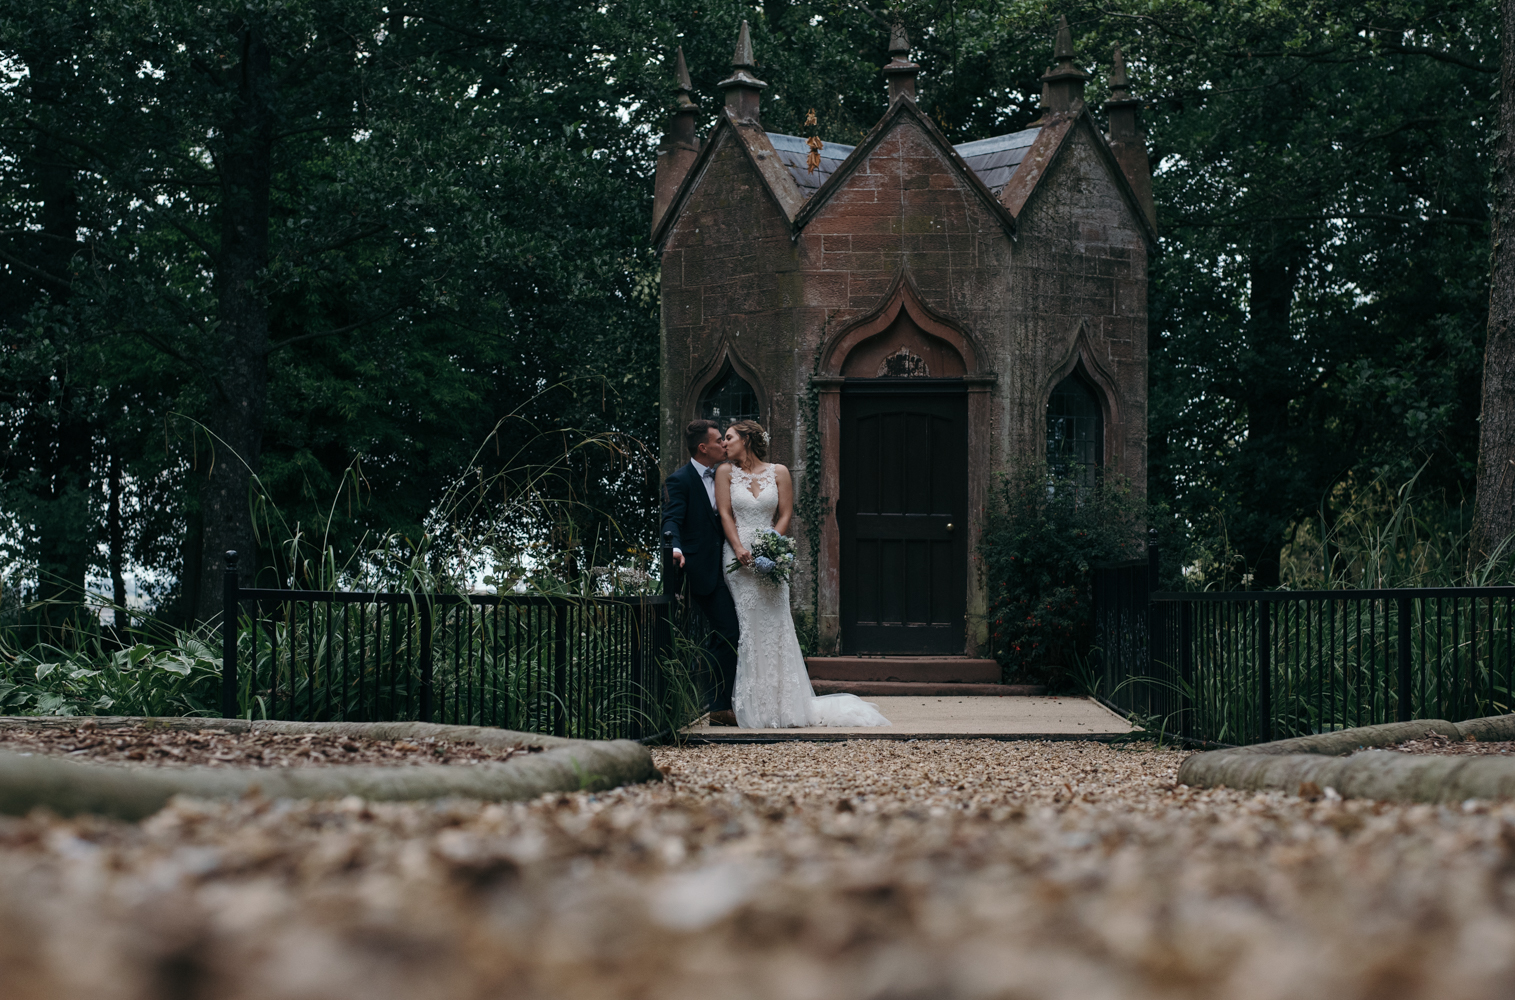 A bride and groom kissing near the old pumping station